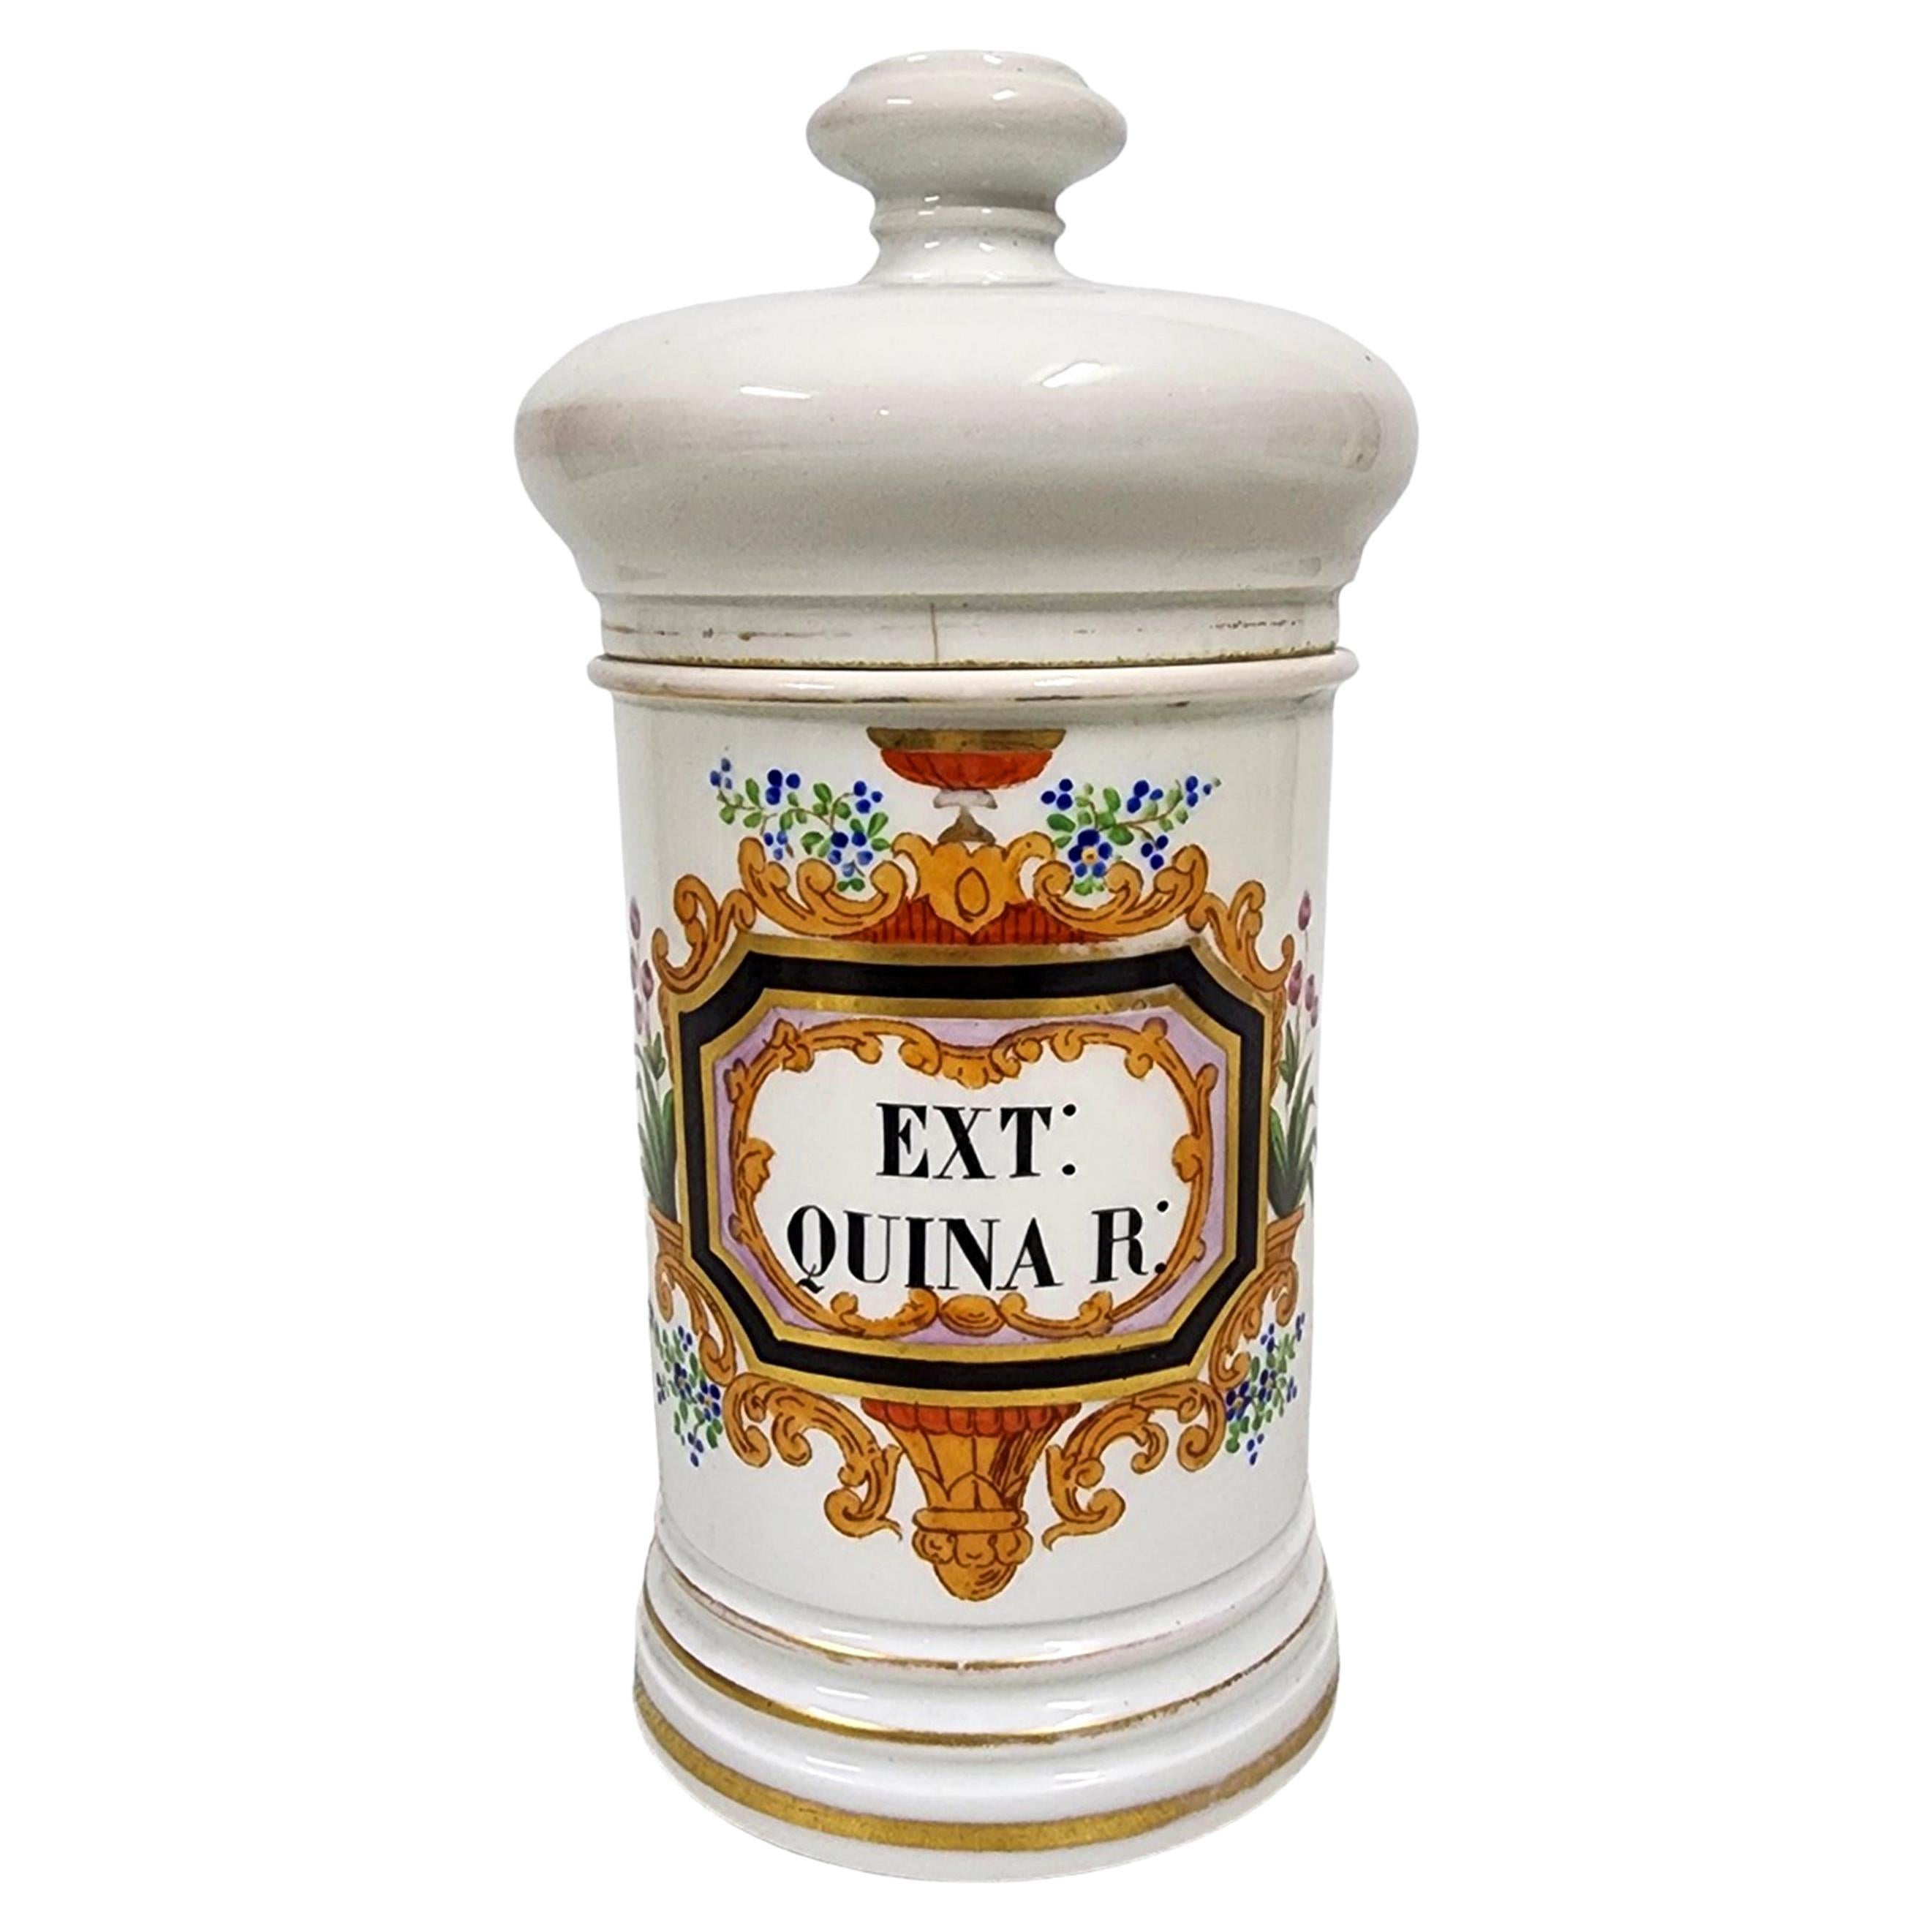 19th Century French Glazed Porcelain Apothecary/Pharmacy Jar - 'EXT: QUINA R:'